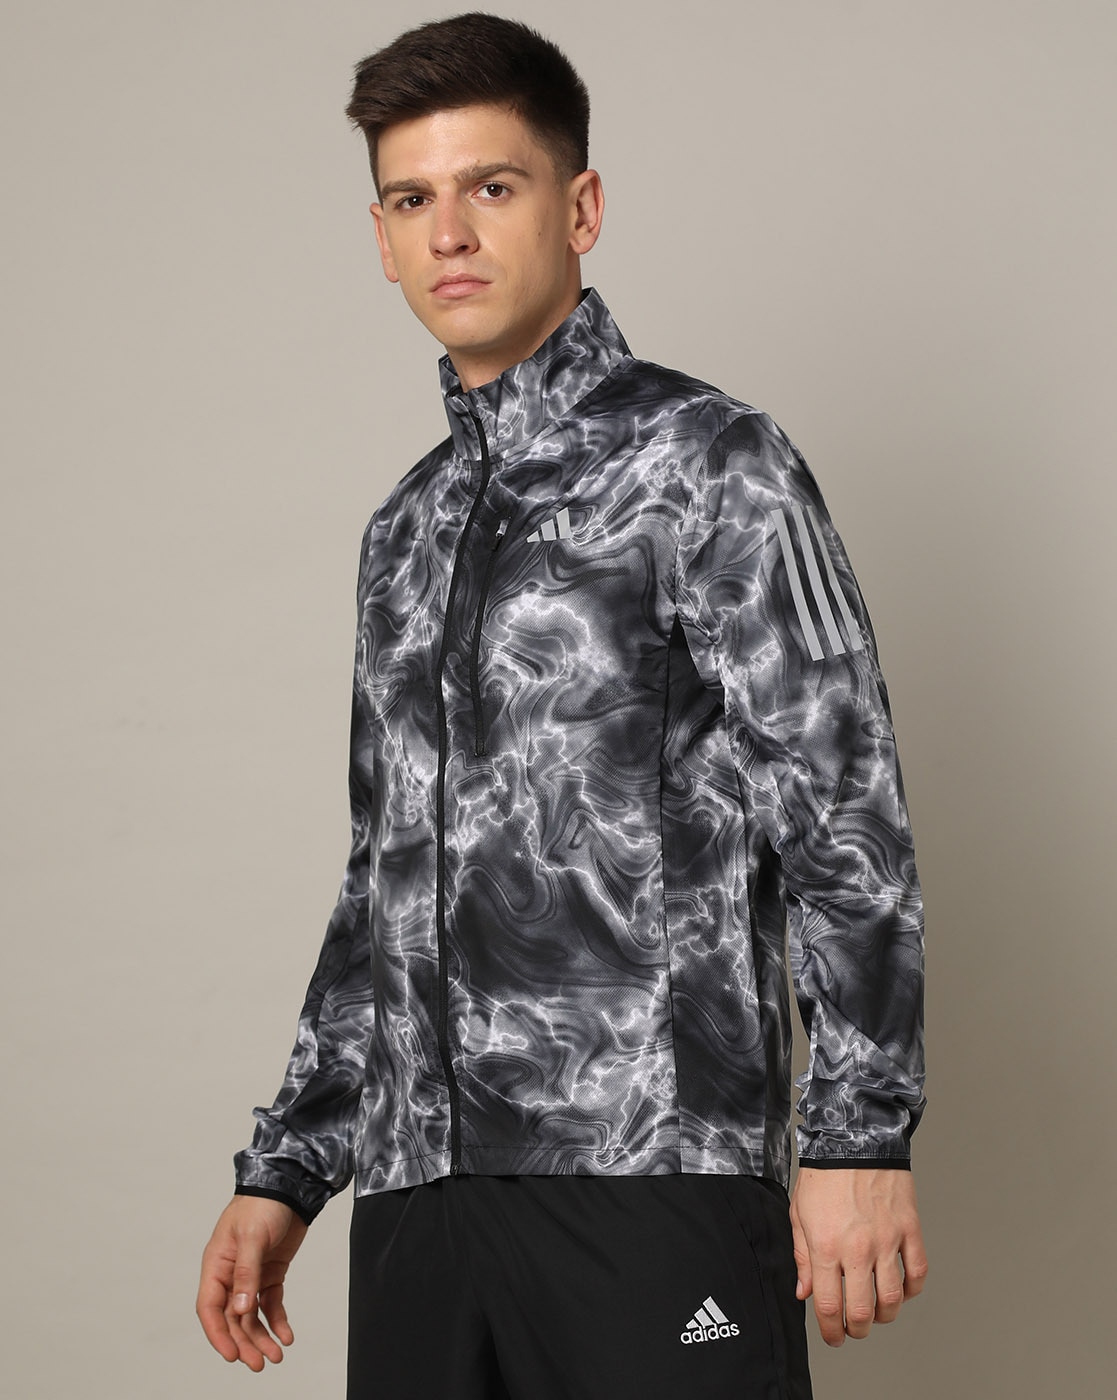 Buy Black Jackets ADIDAS Men for by Coats Online 